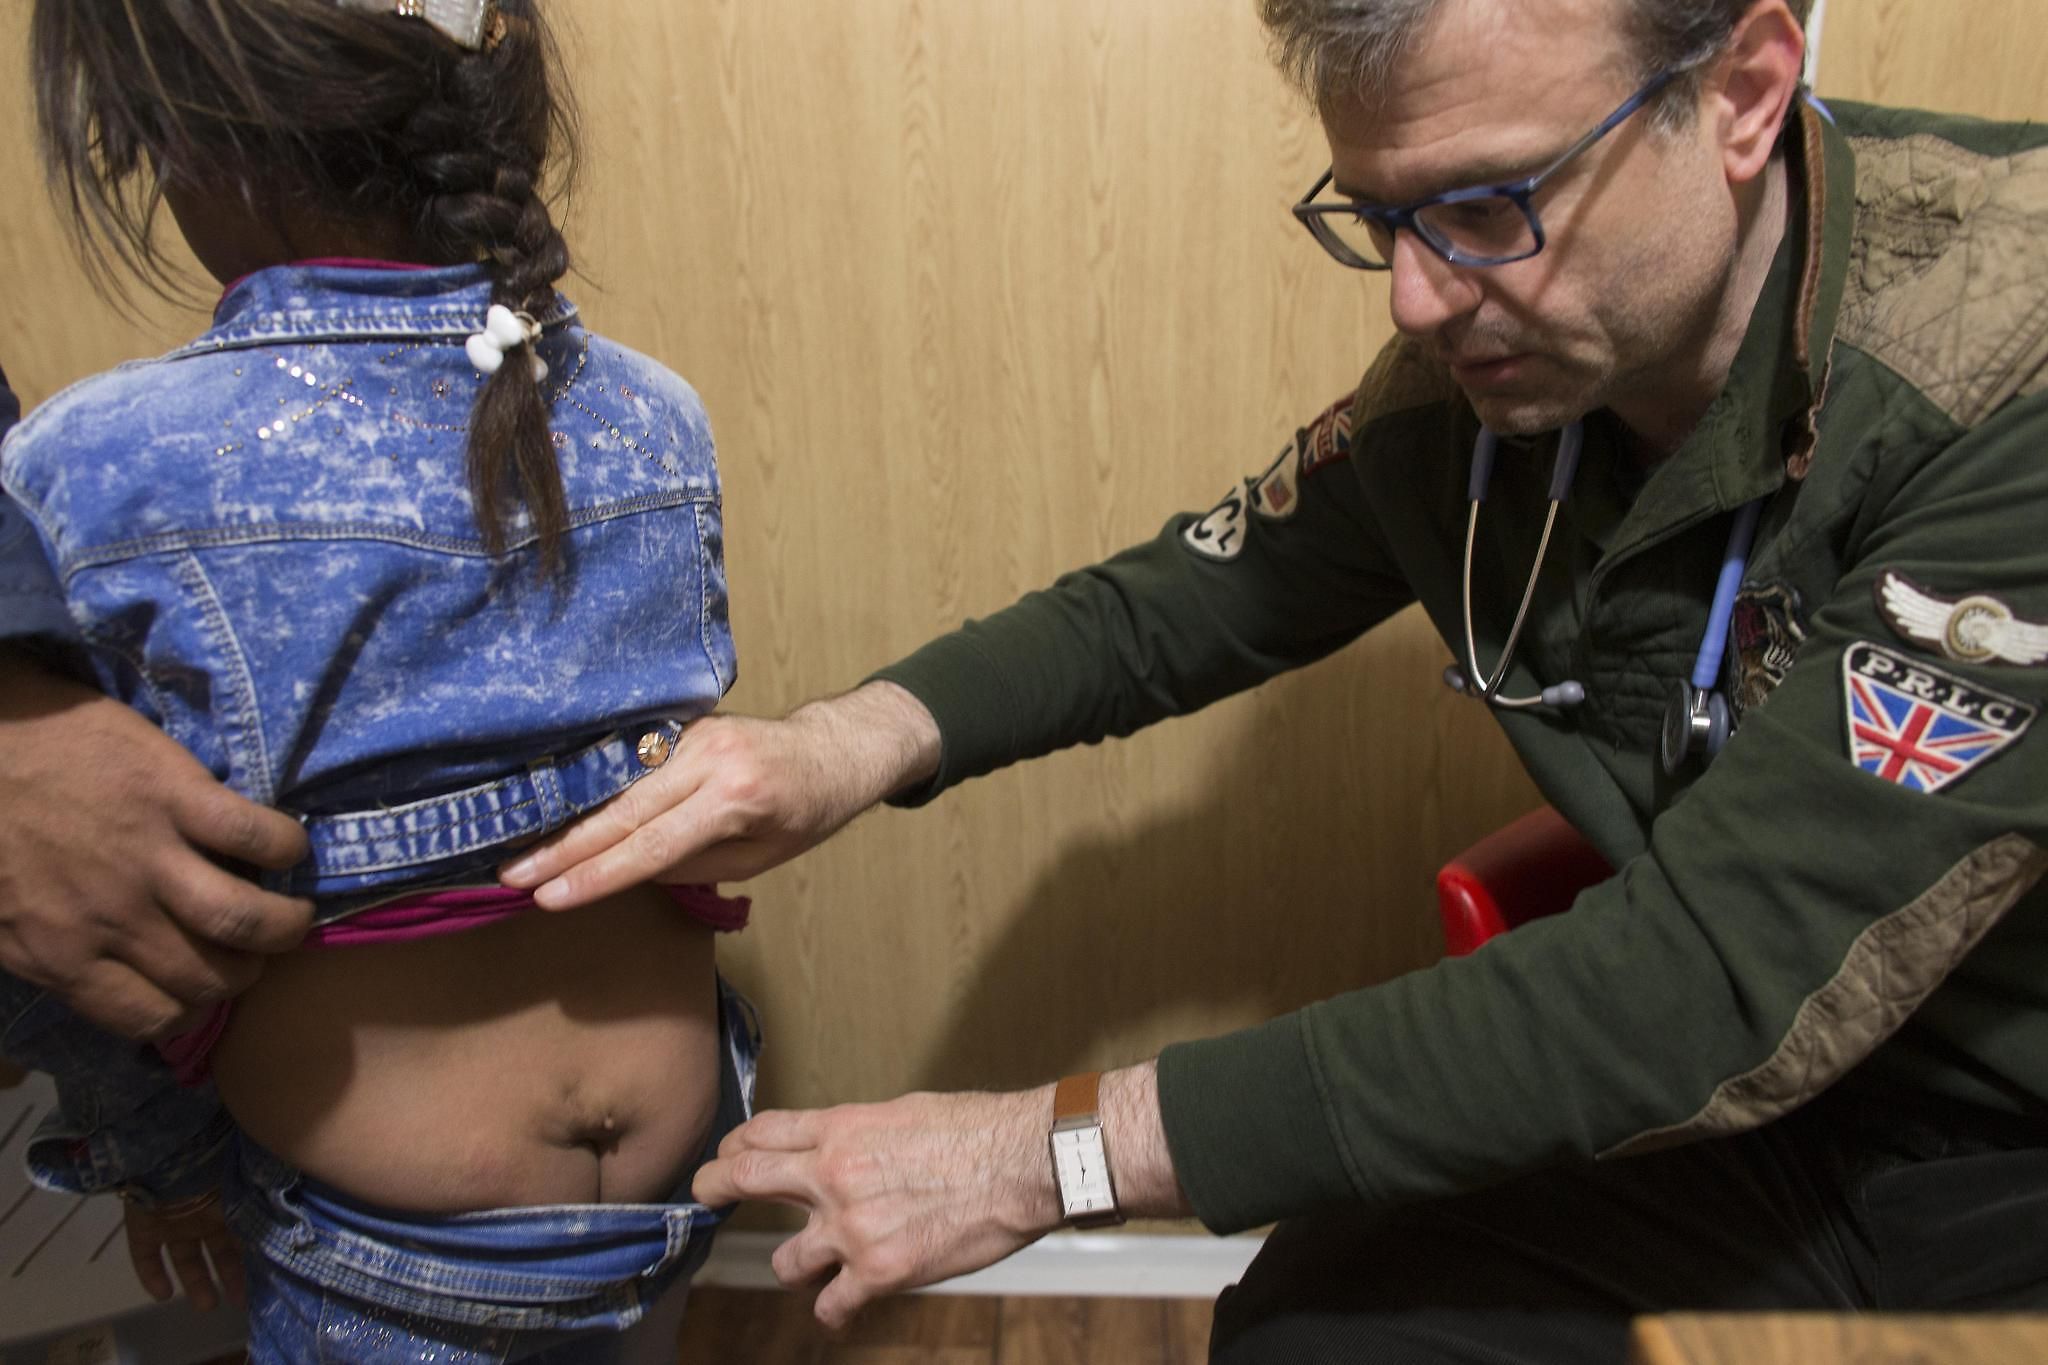 Brookfield pediatric neurologist Tarif Bakdash examines 8-year-old Sandy Al Mekdad who has condition known as a tethered spinal cord. She now suffers from incontinence and leg pain. The defect can be corrected by surgery,but the procedure cannot be done inside the camp. Image by Mark Hoffman. Jordan, 2016.